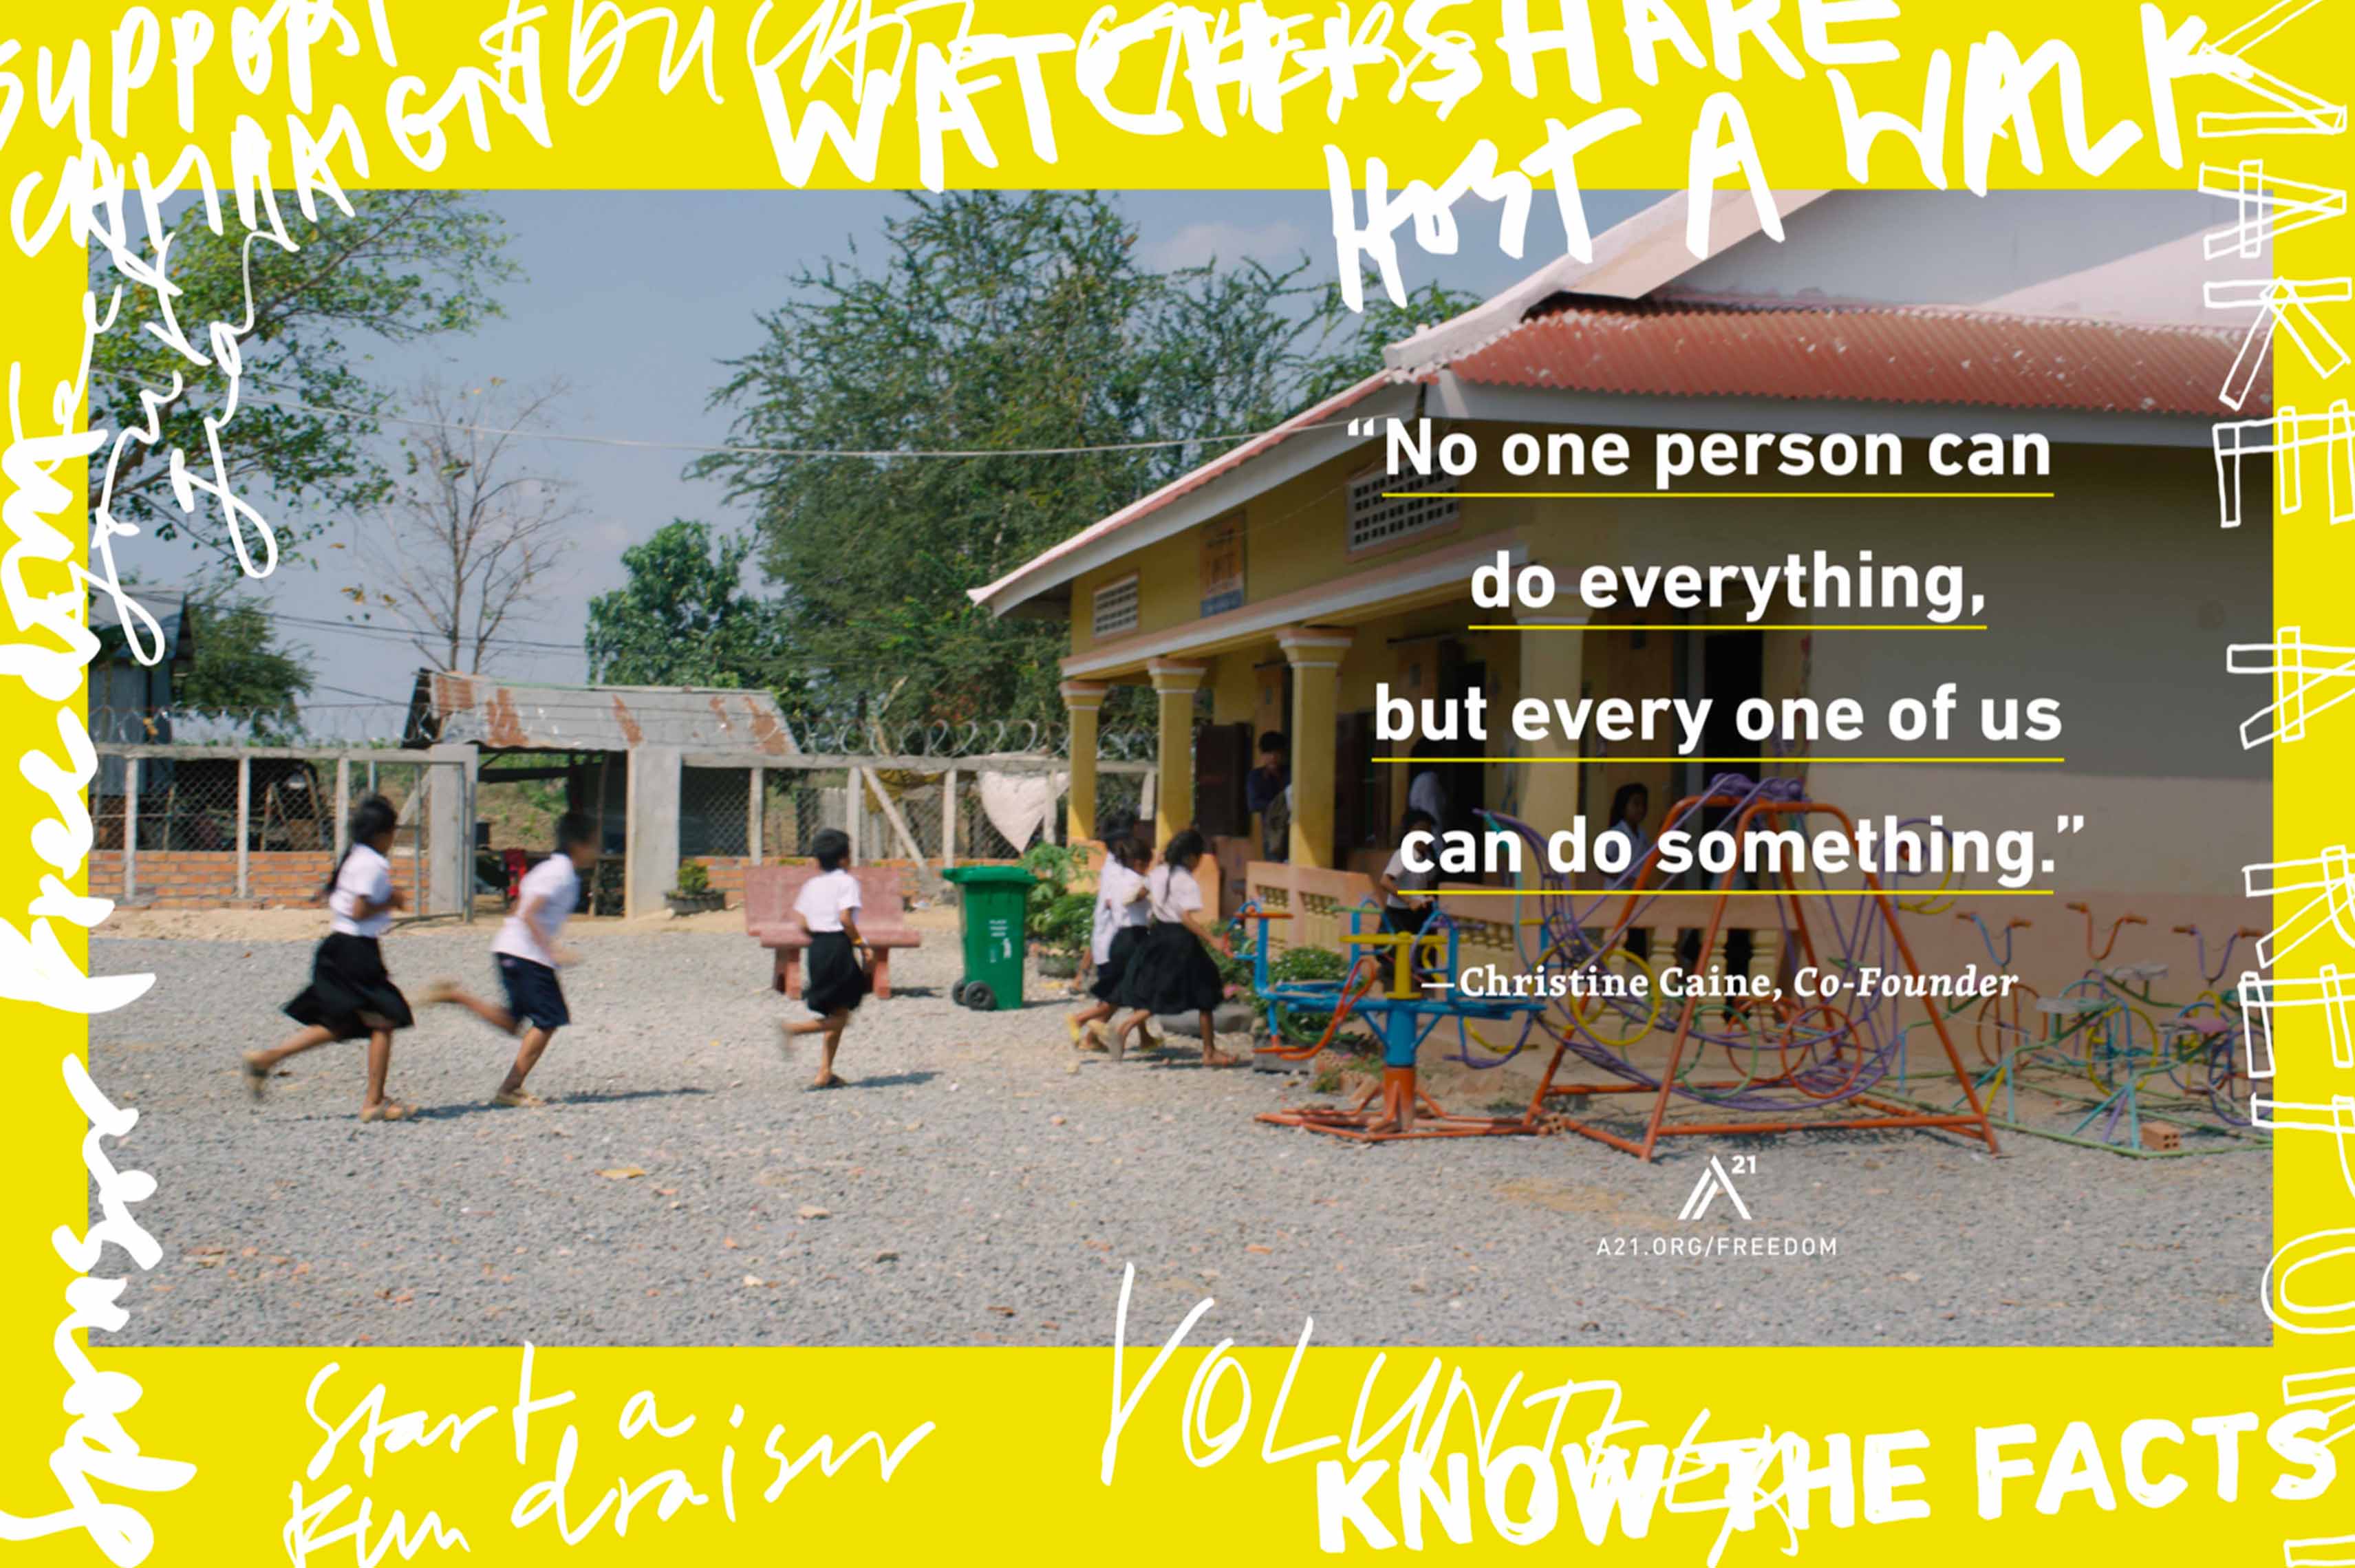 Poster 11: No one person can do everything, but every one of us can do something. – Christine Caine, Co-Founder